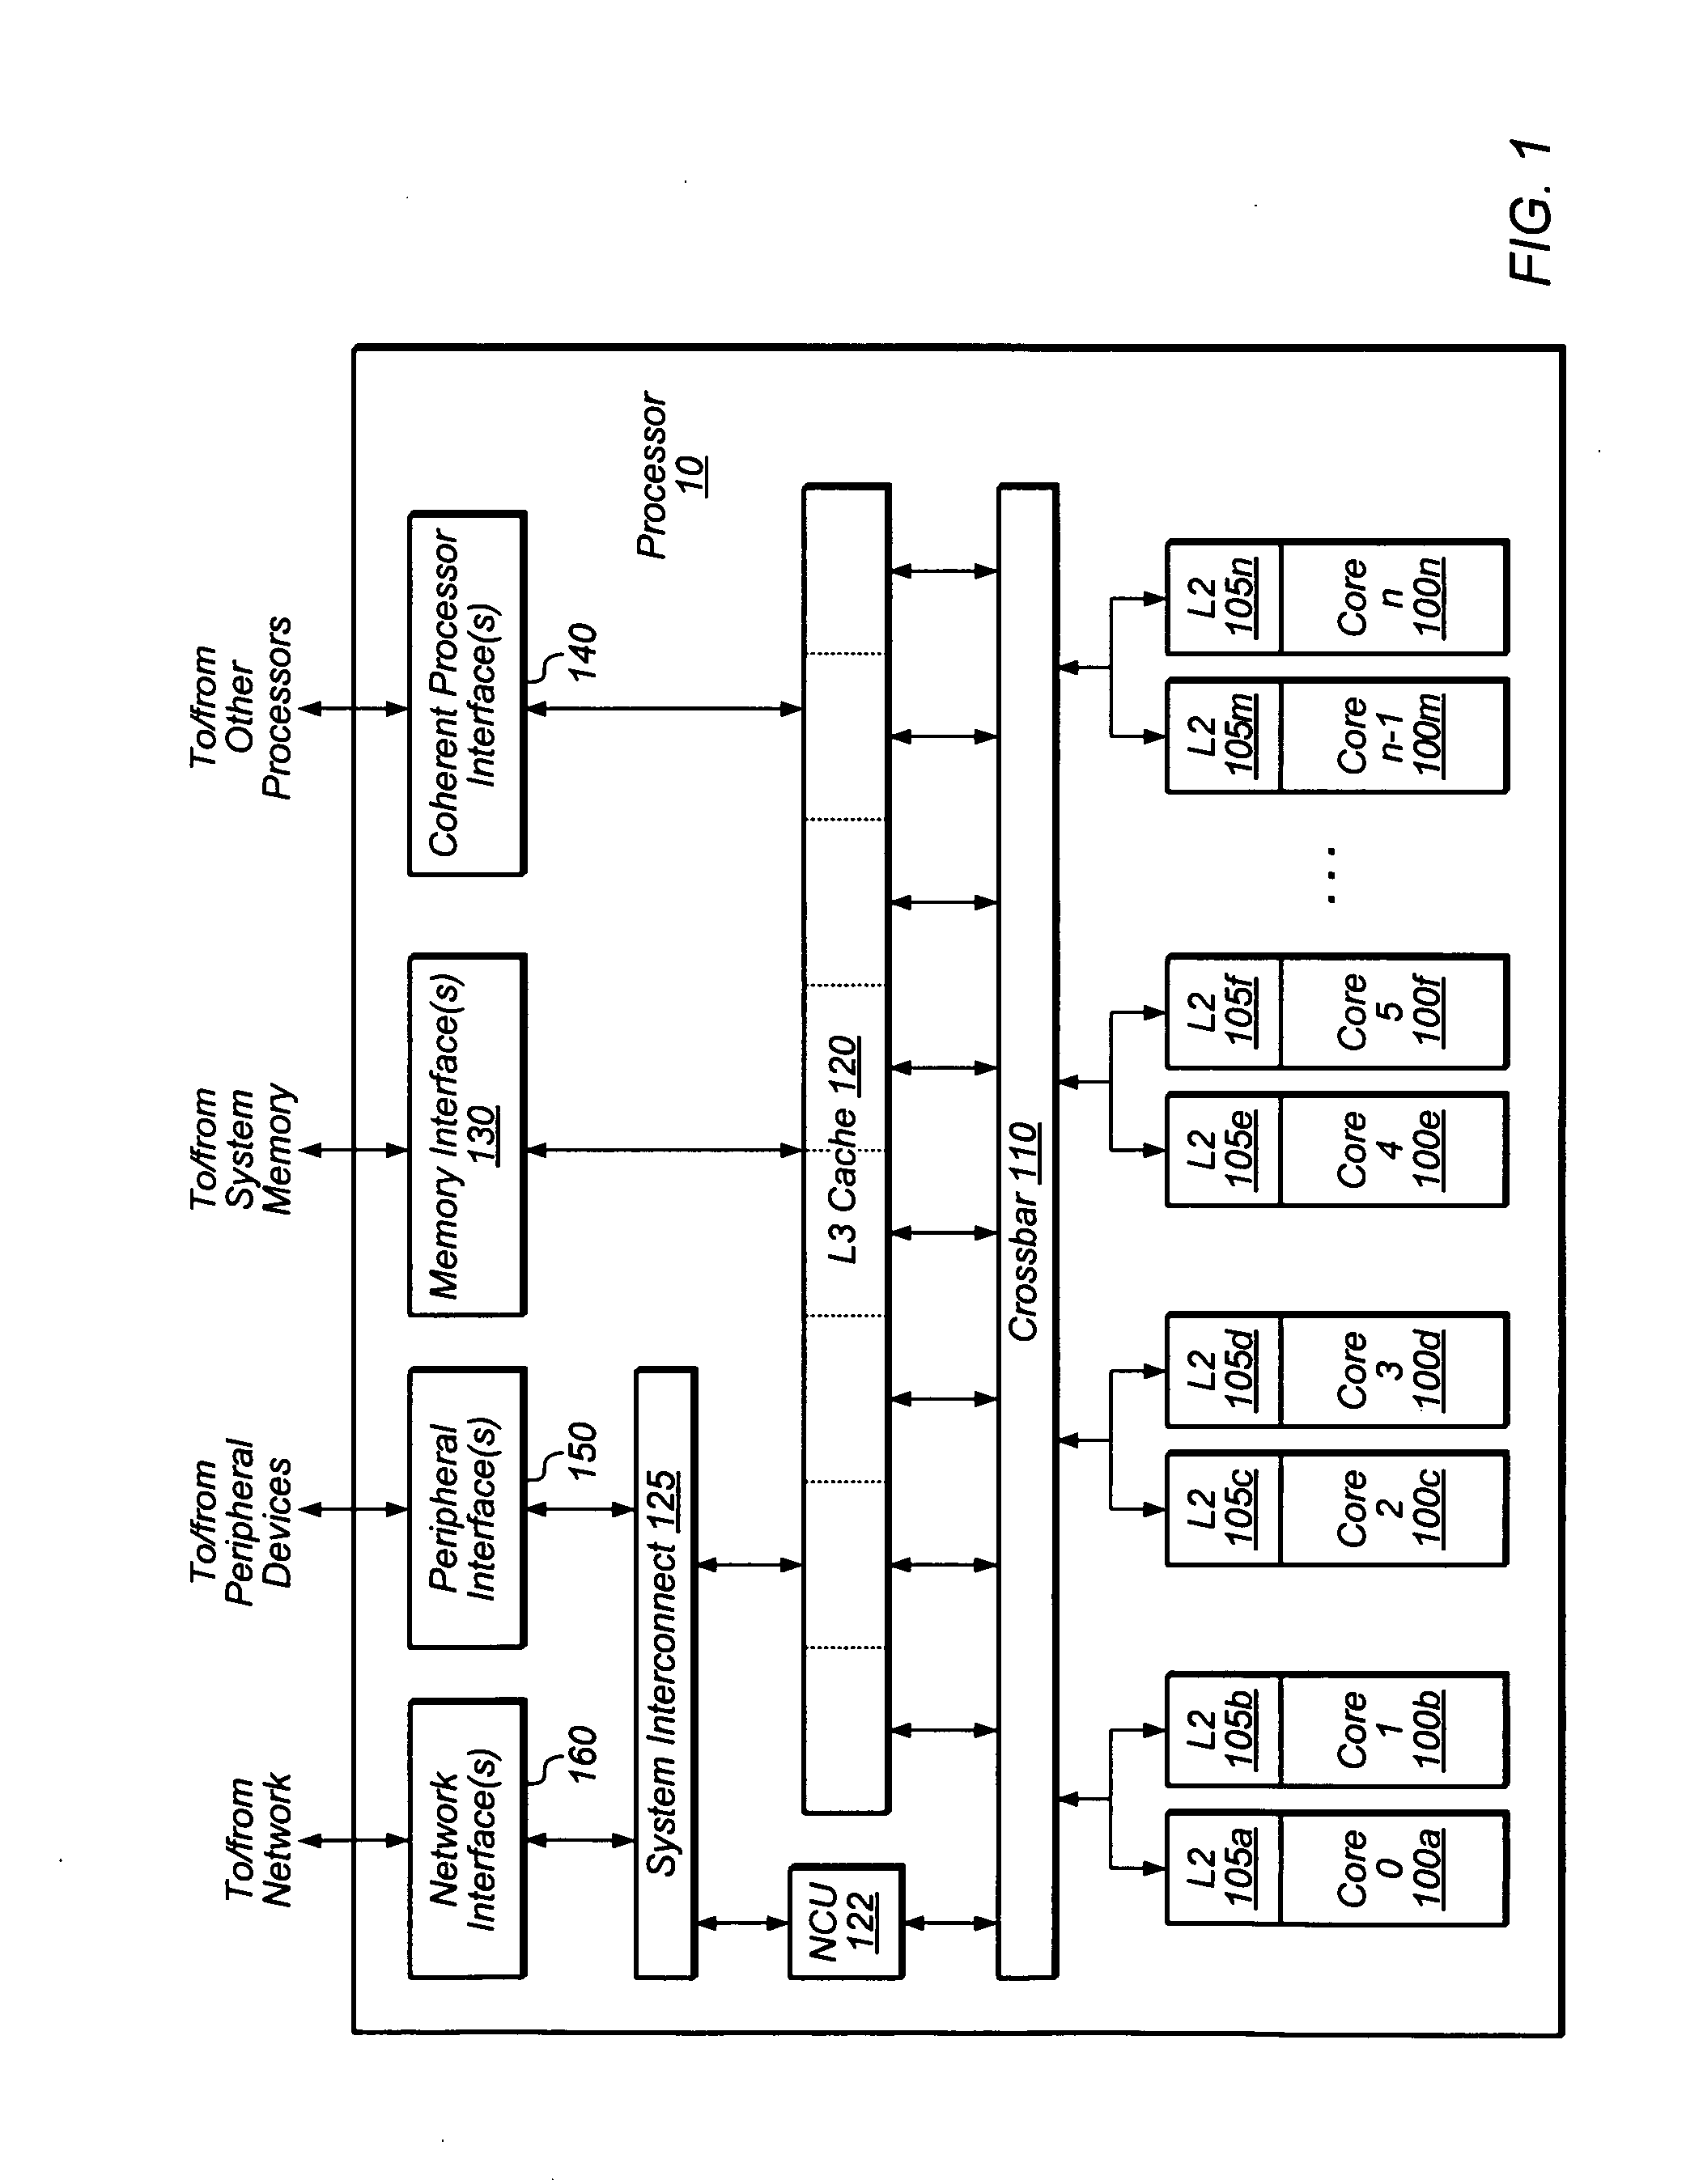 Dynamic tag allocation in a multithreaded out-of-order processor